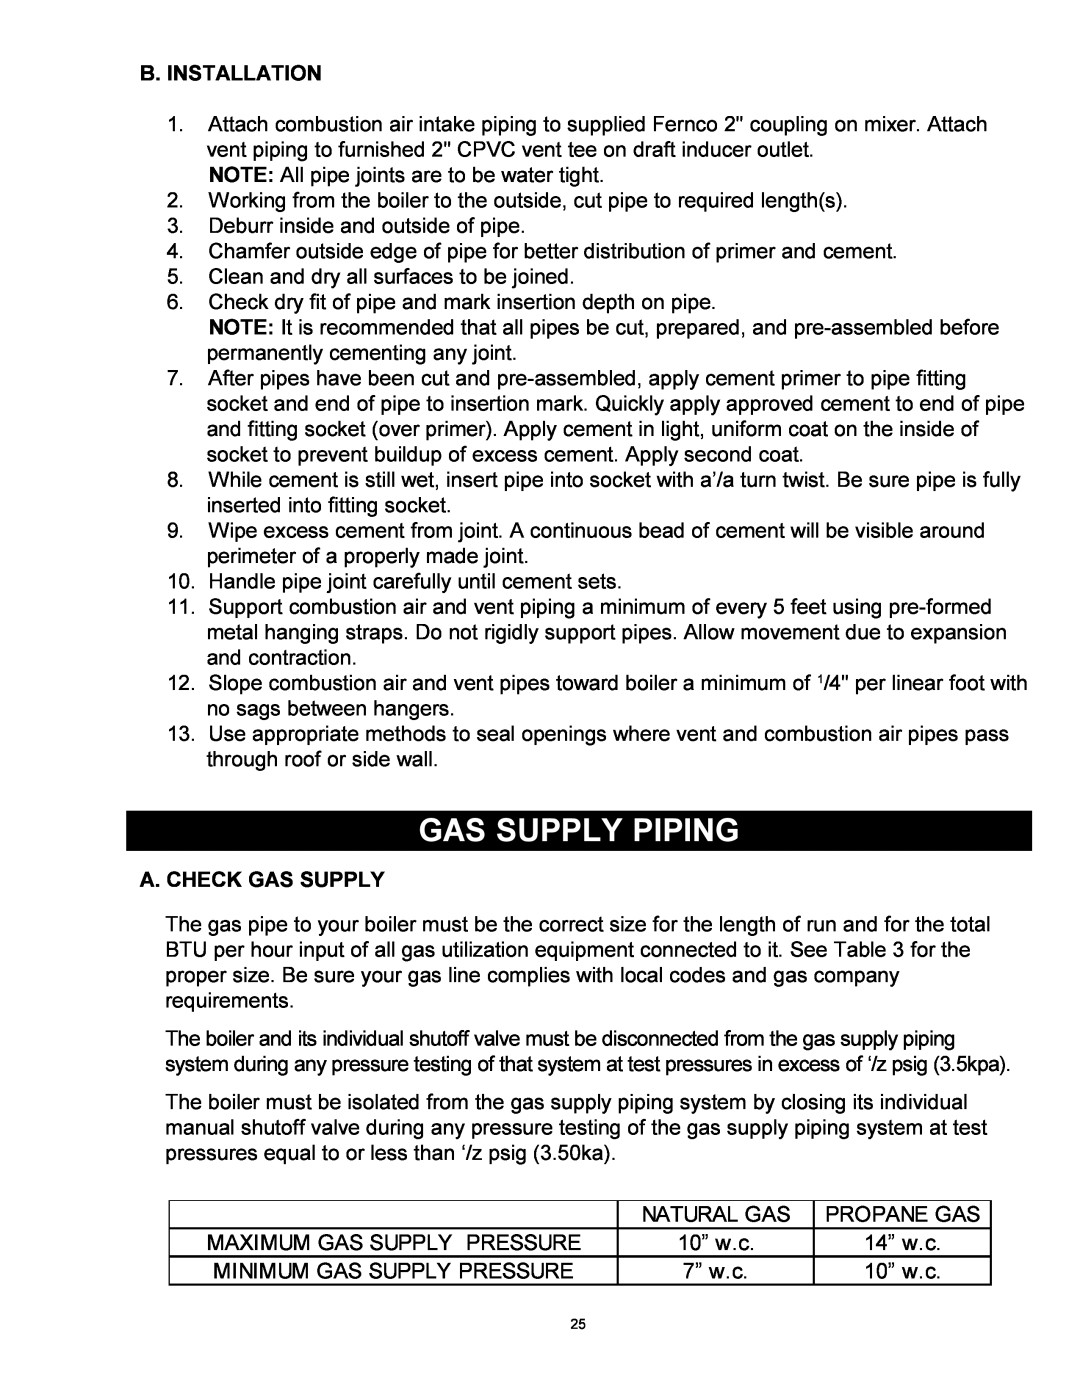 Quantum GAS-FIRED BOILERS installation instructions Gas Supply Piping, B.Installation, A. Check Gas Supply 